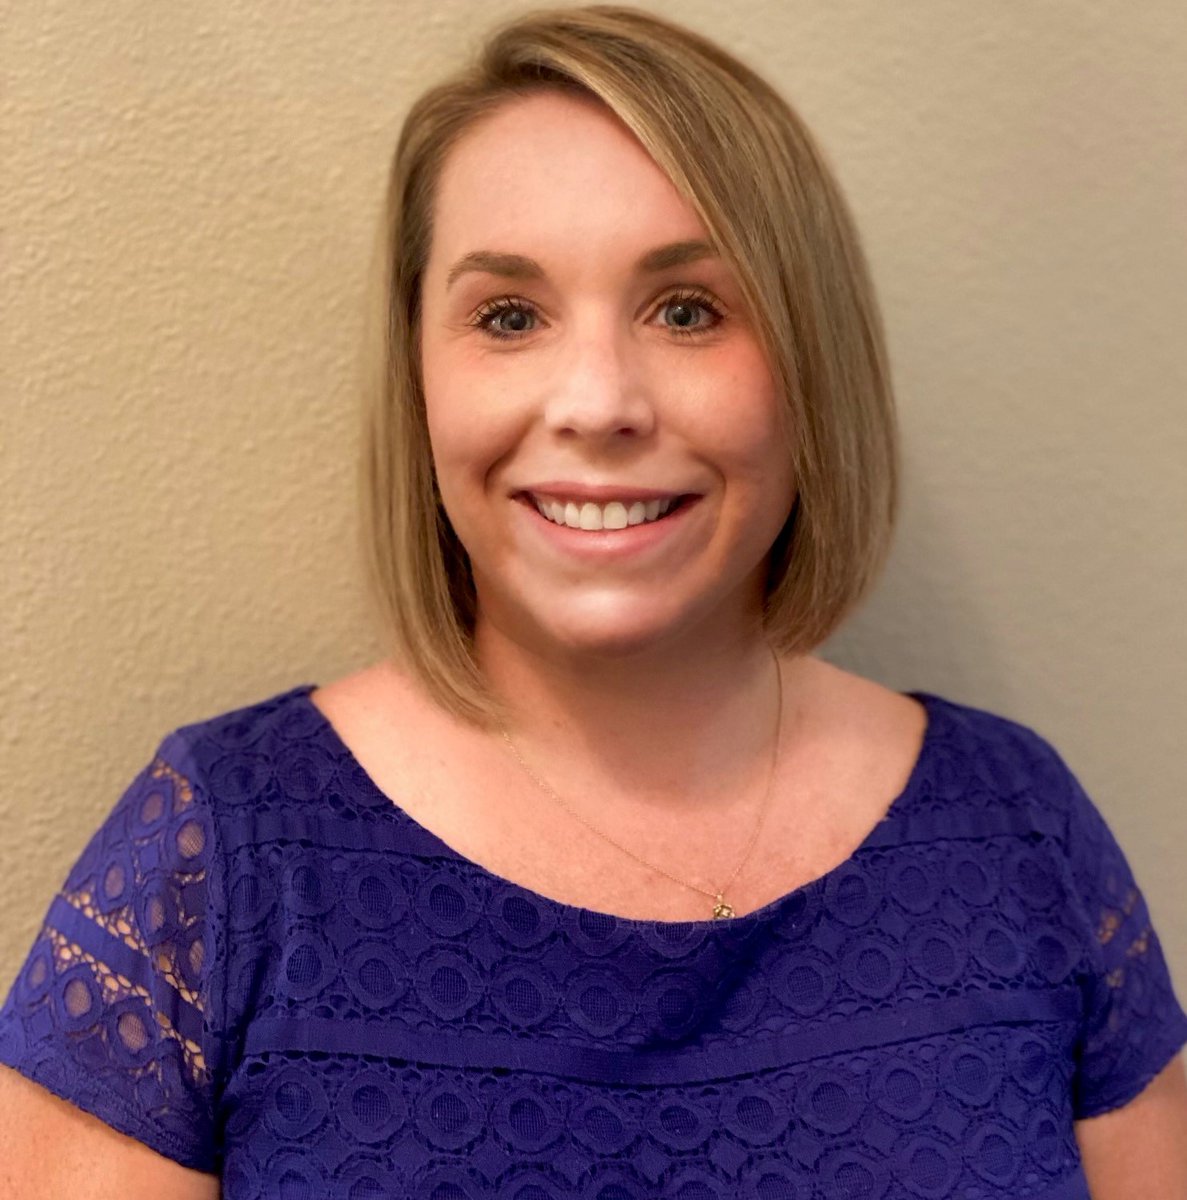 Corpus Christi ISD has named Rachel Neff as principal of Cunningham Middle School at South Park. She follows Sandy Salinas-DeLeon, who the district recently named principal of Roy Miller High School.